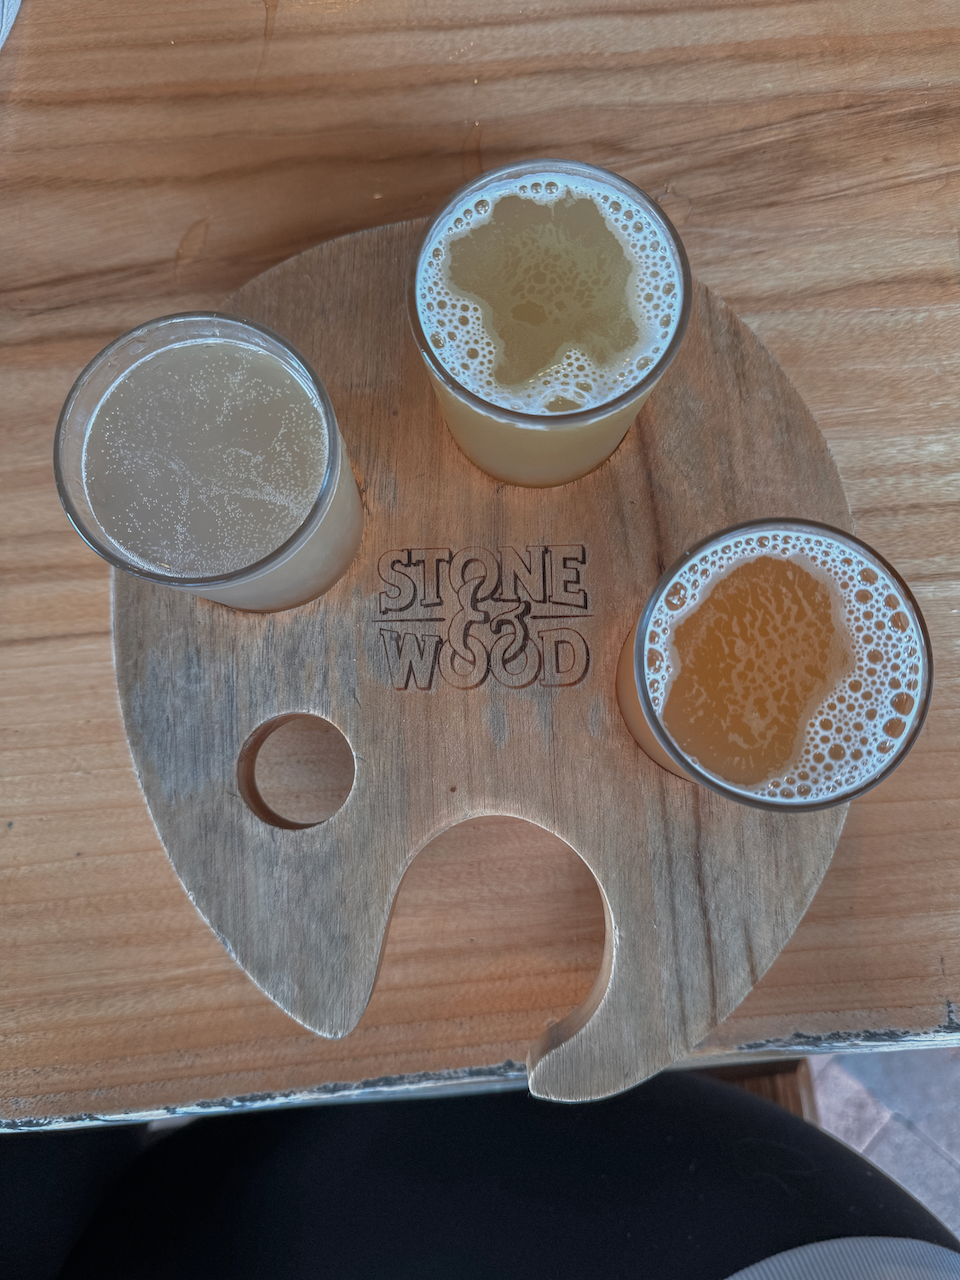 Stone and Wood Brewery - Beer Tasting Platter - Byron Bay - New South Wales - Australia